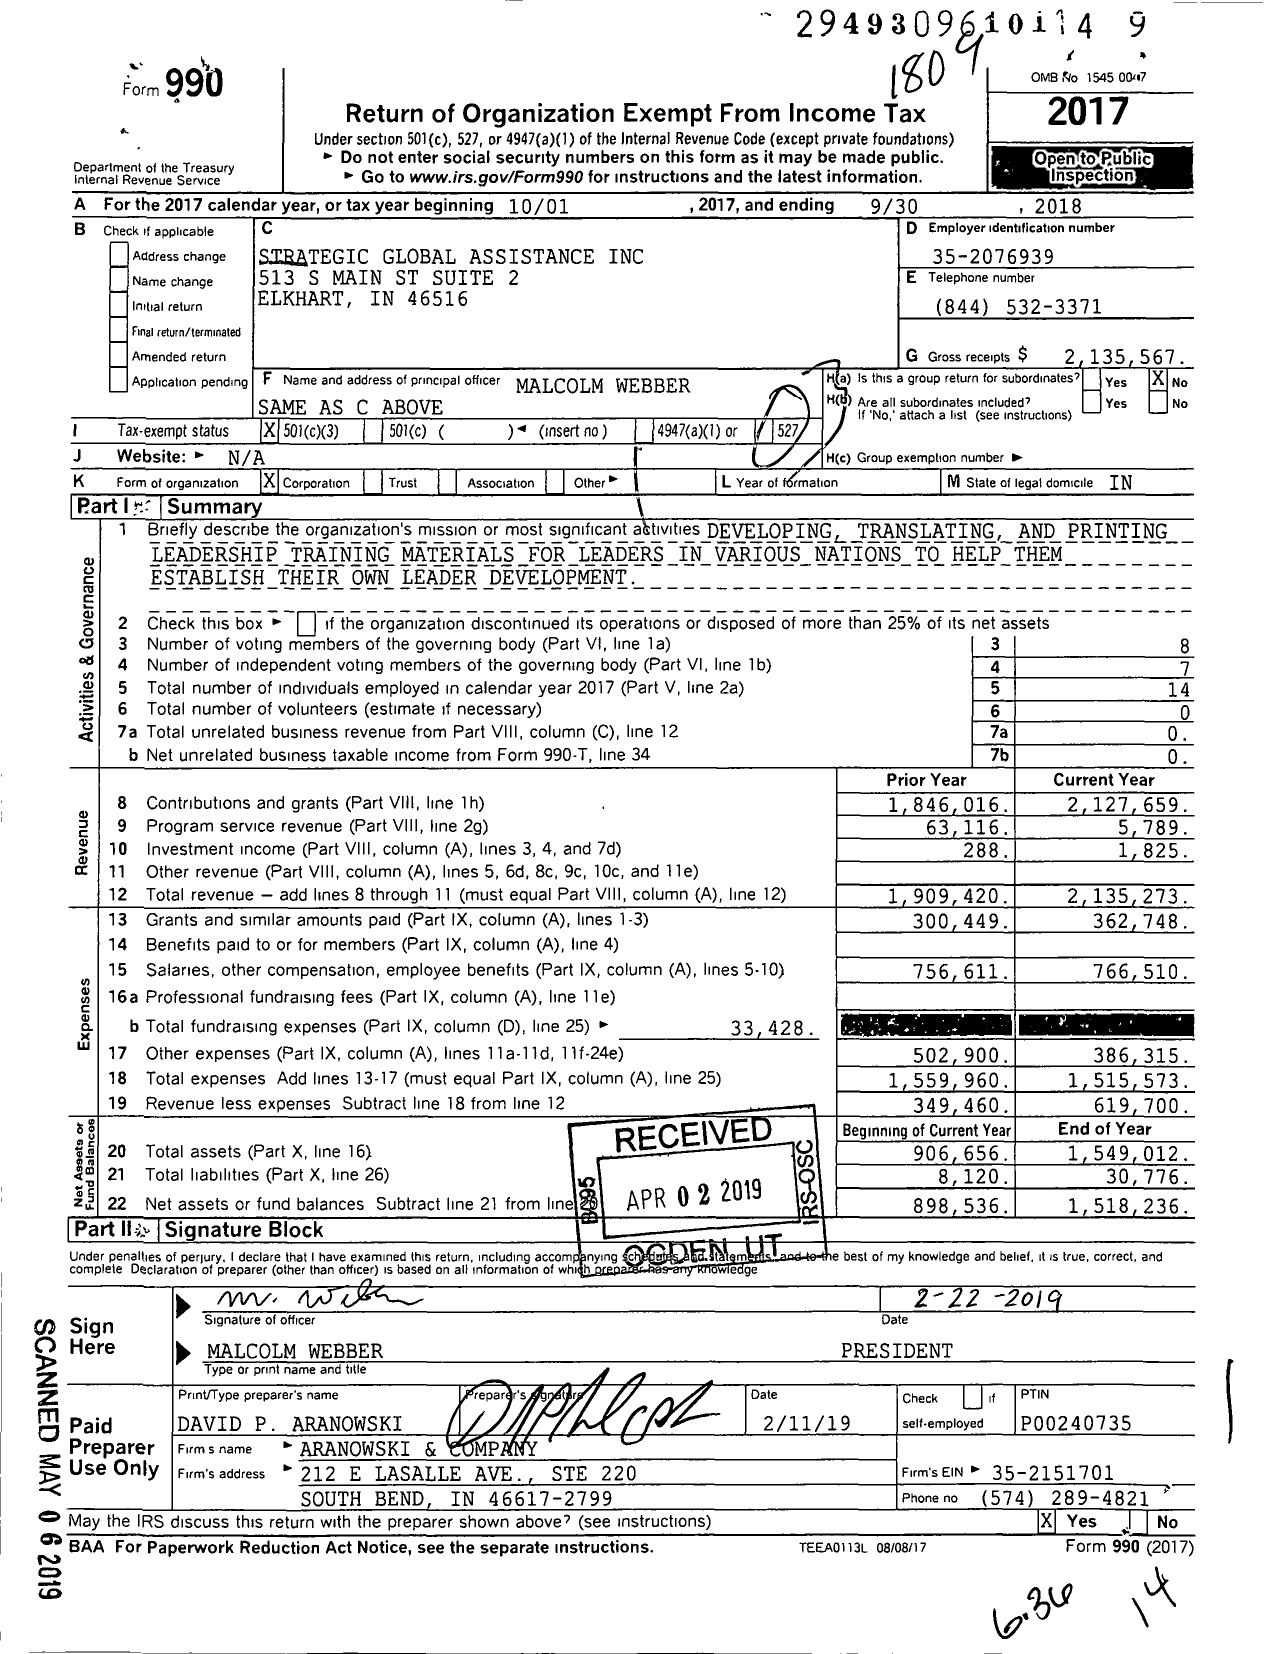 Image of first page of 2017 Form 990 for Strategic Global Assistance